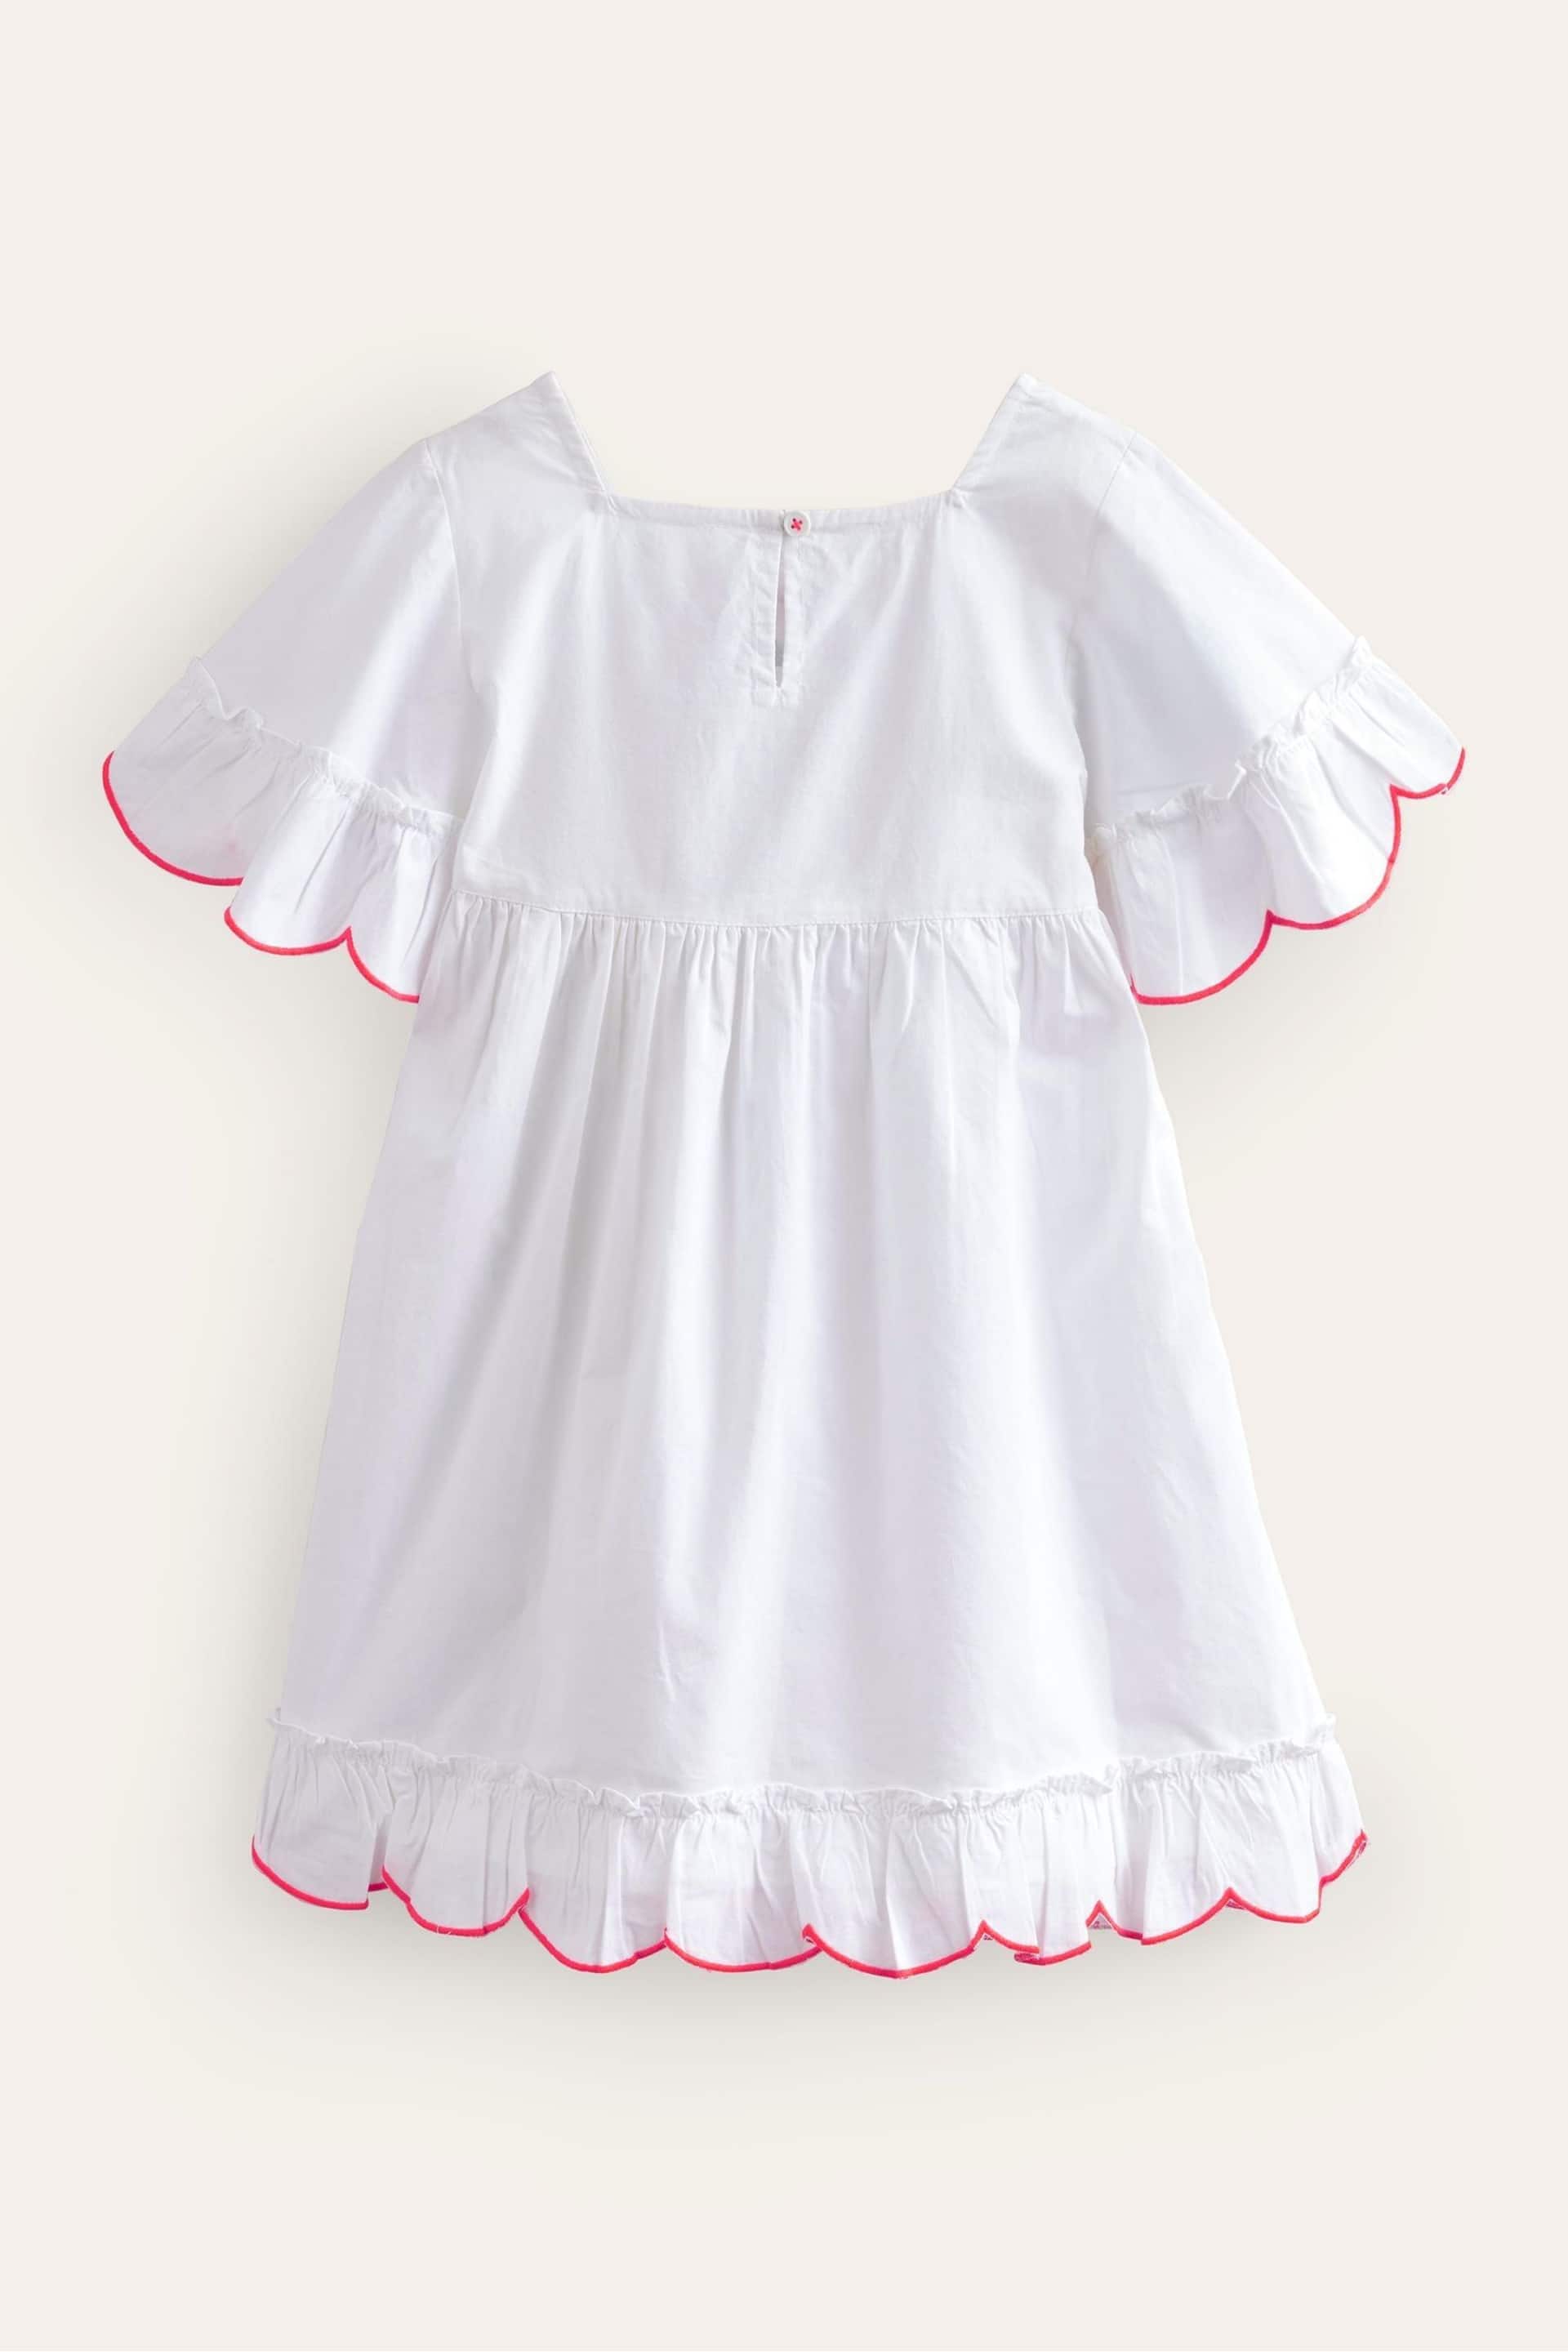 Boden White Lightweight Holiday Dress - Image 2 of 3